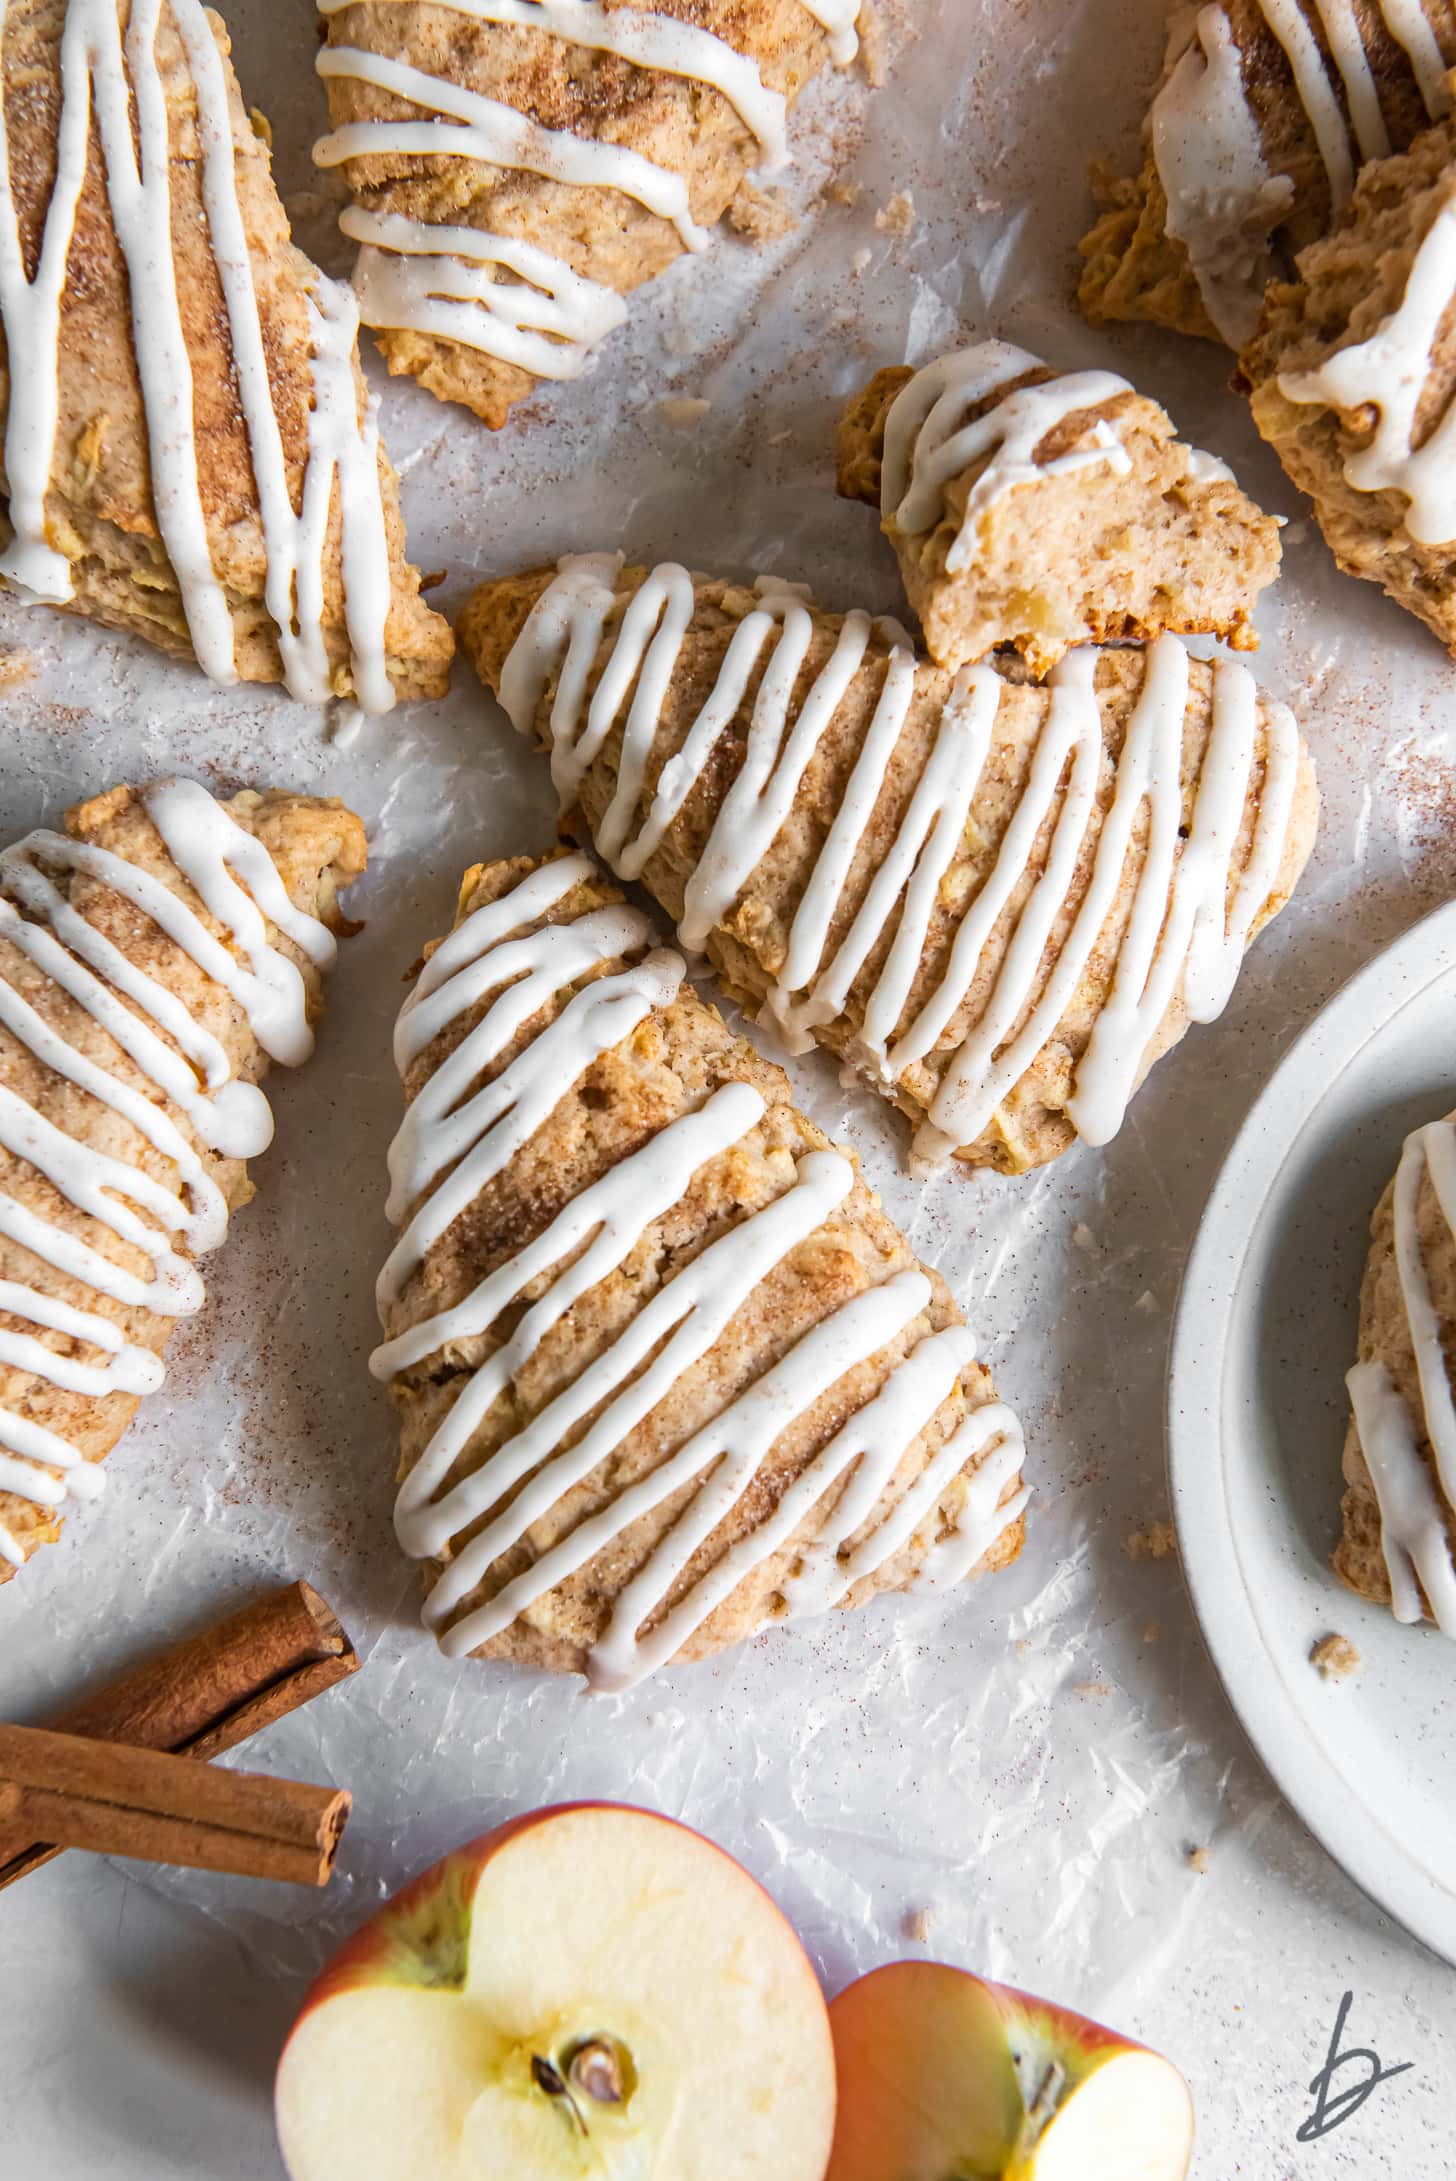 apple cinnamon scones with glaze drizzled on top.